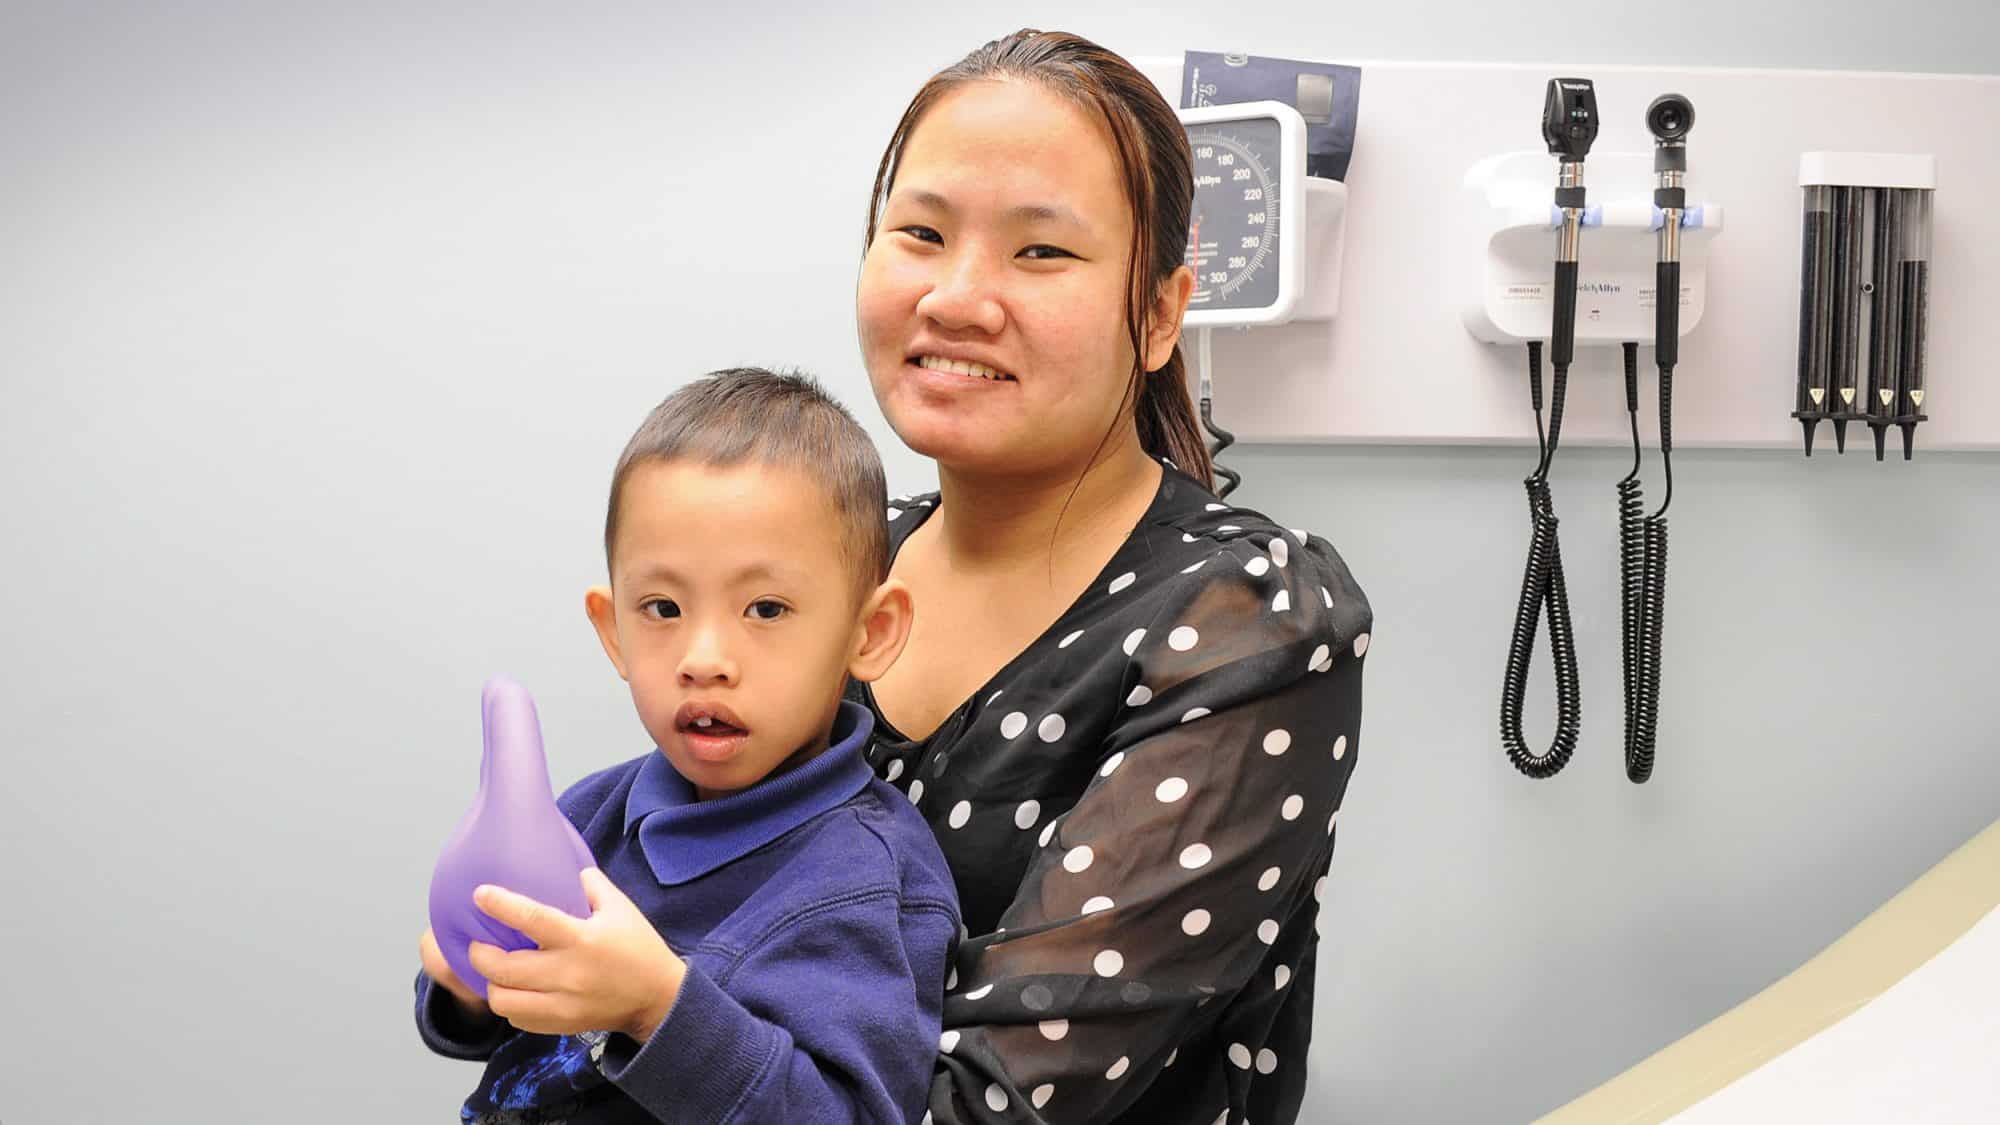 Baltimore Medical System asthma and allergy patient, two year old Cruz Ma and his mother.